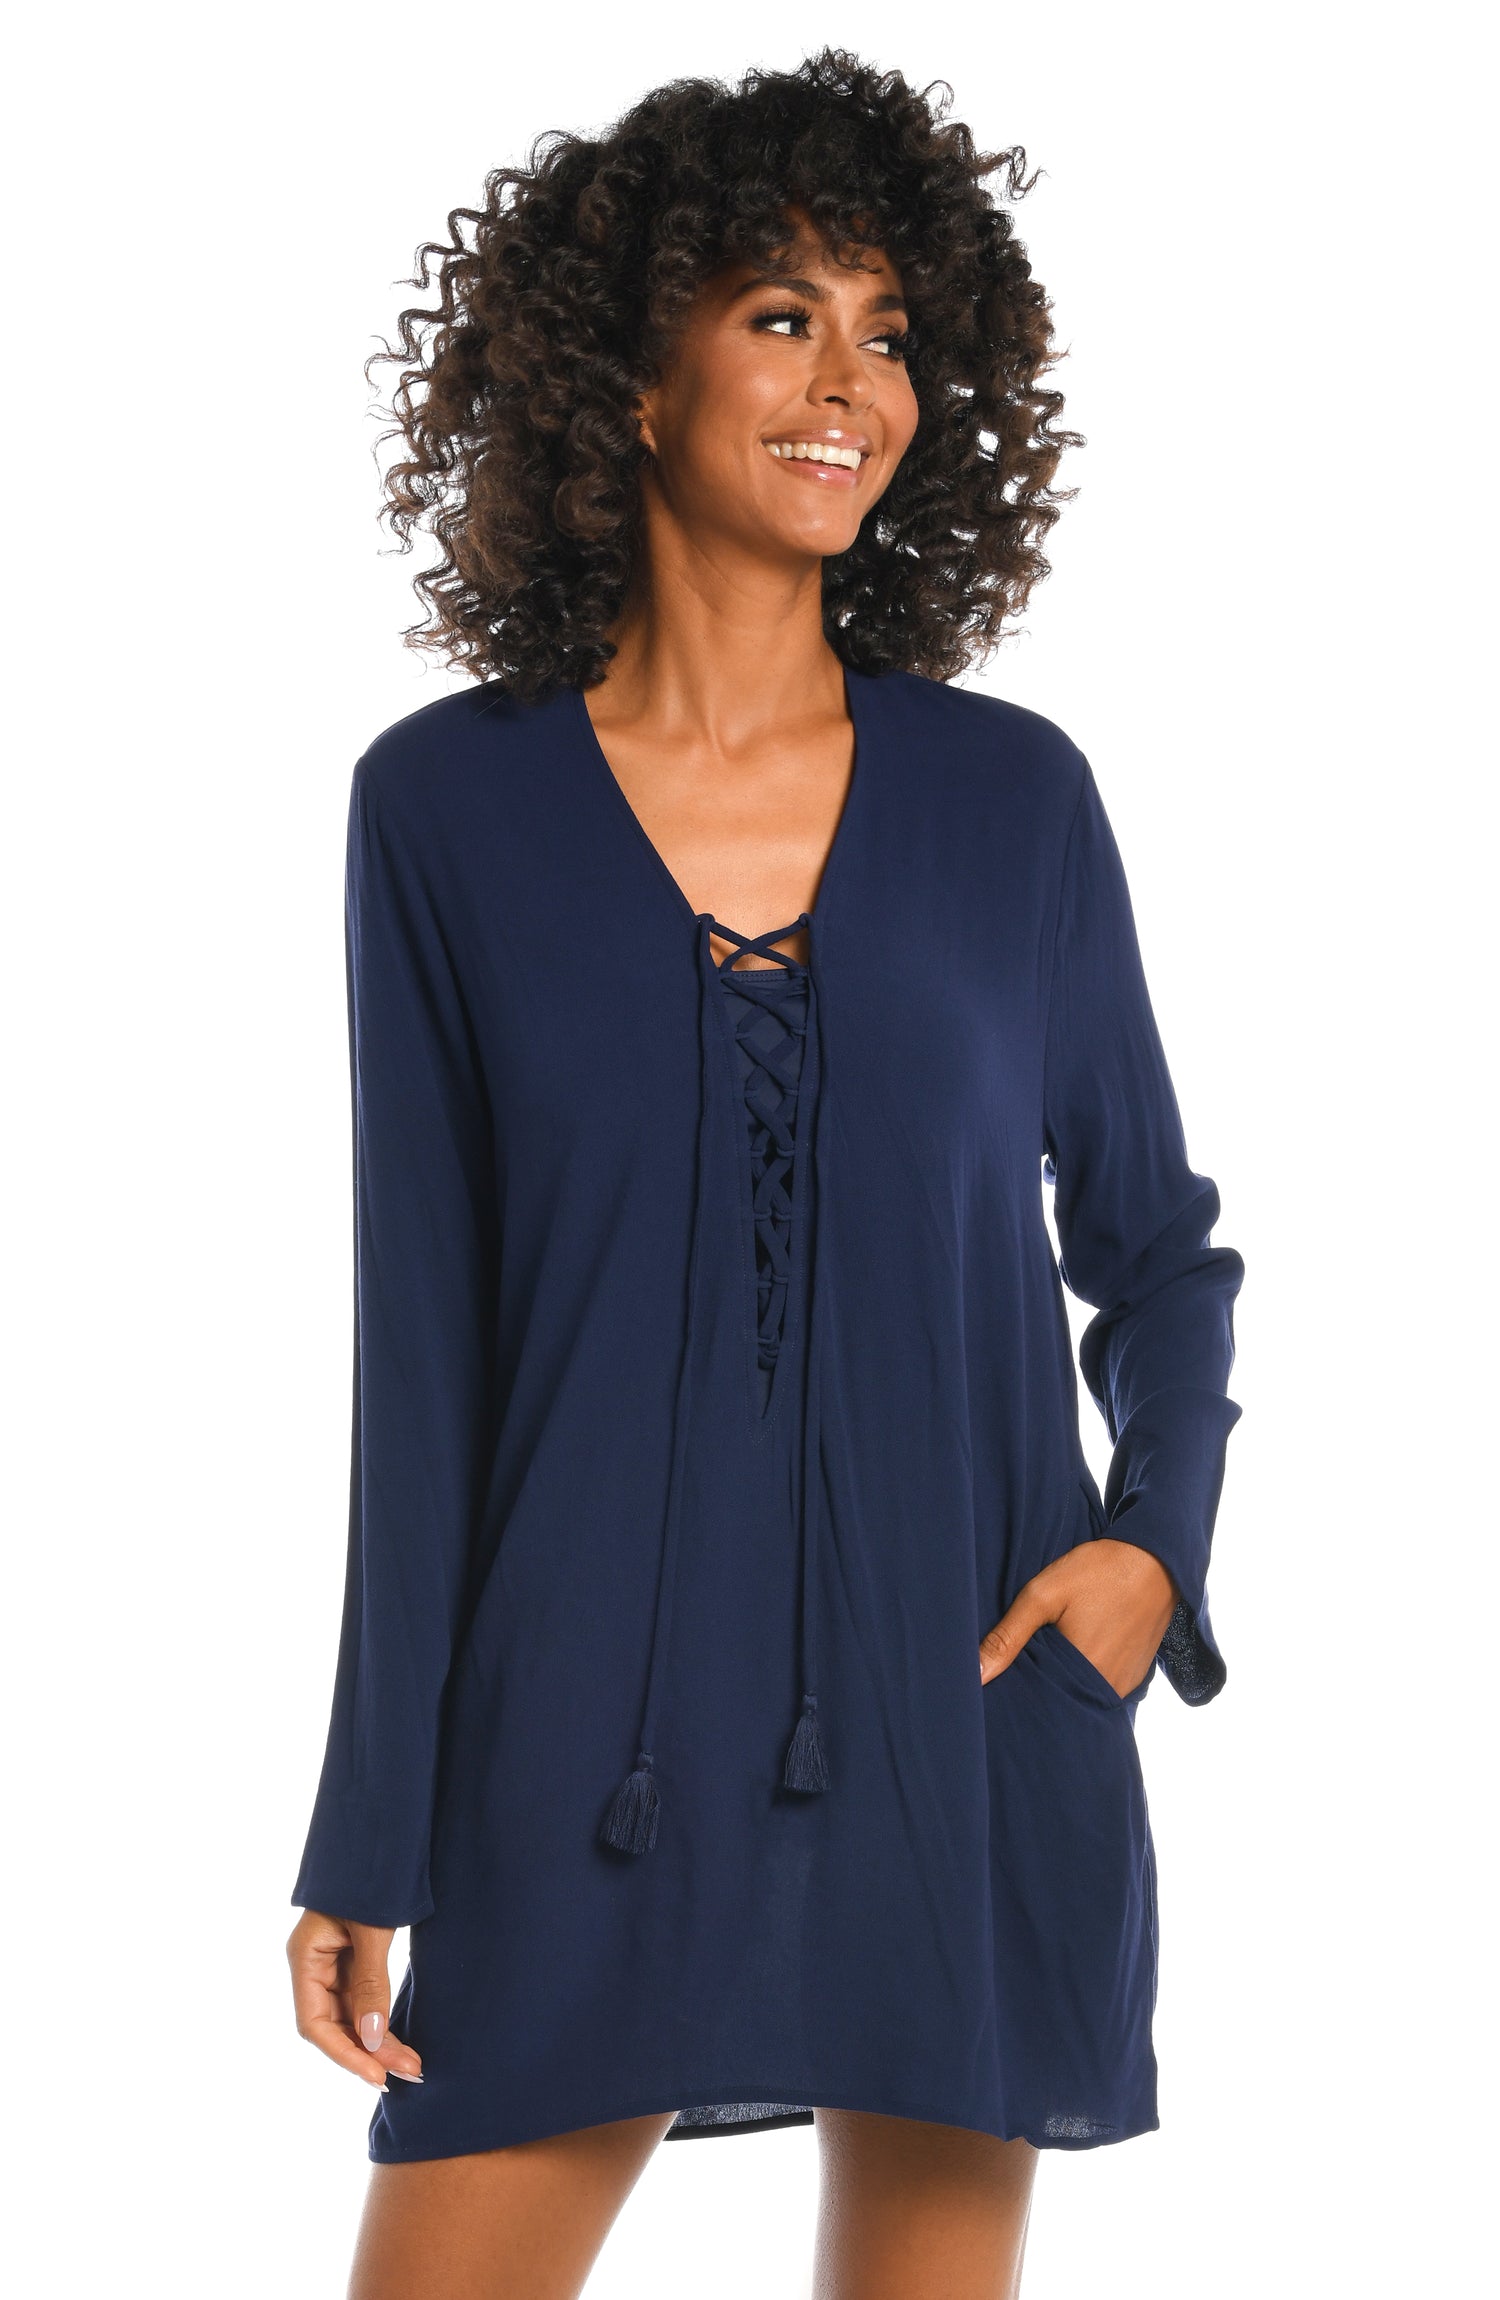 Model is wearing a solid indigo colored tunic cover up from our Beachcomber Basics collection!